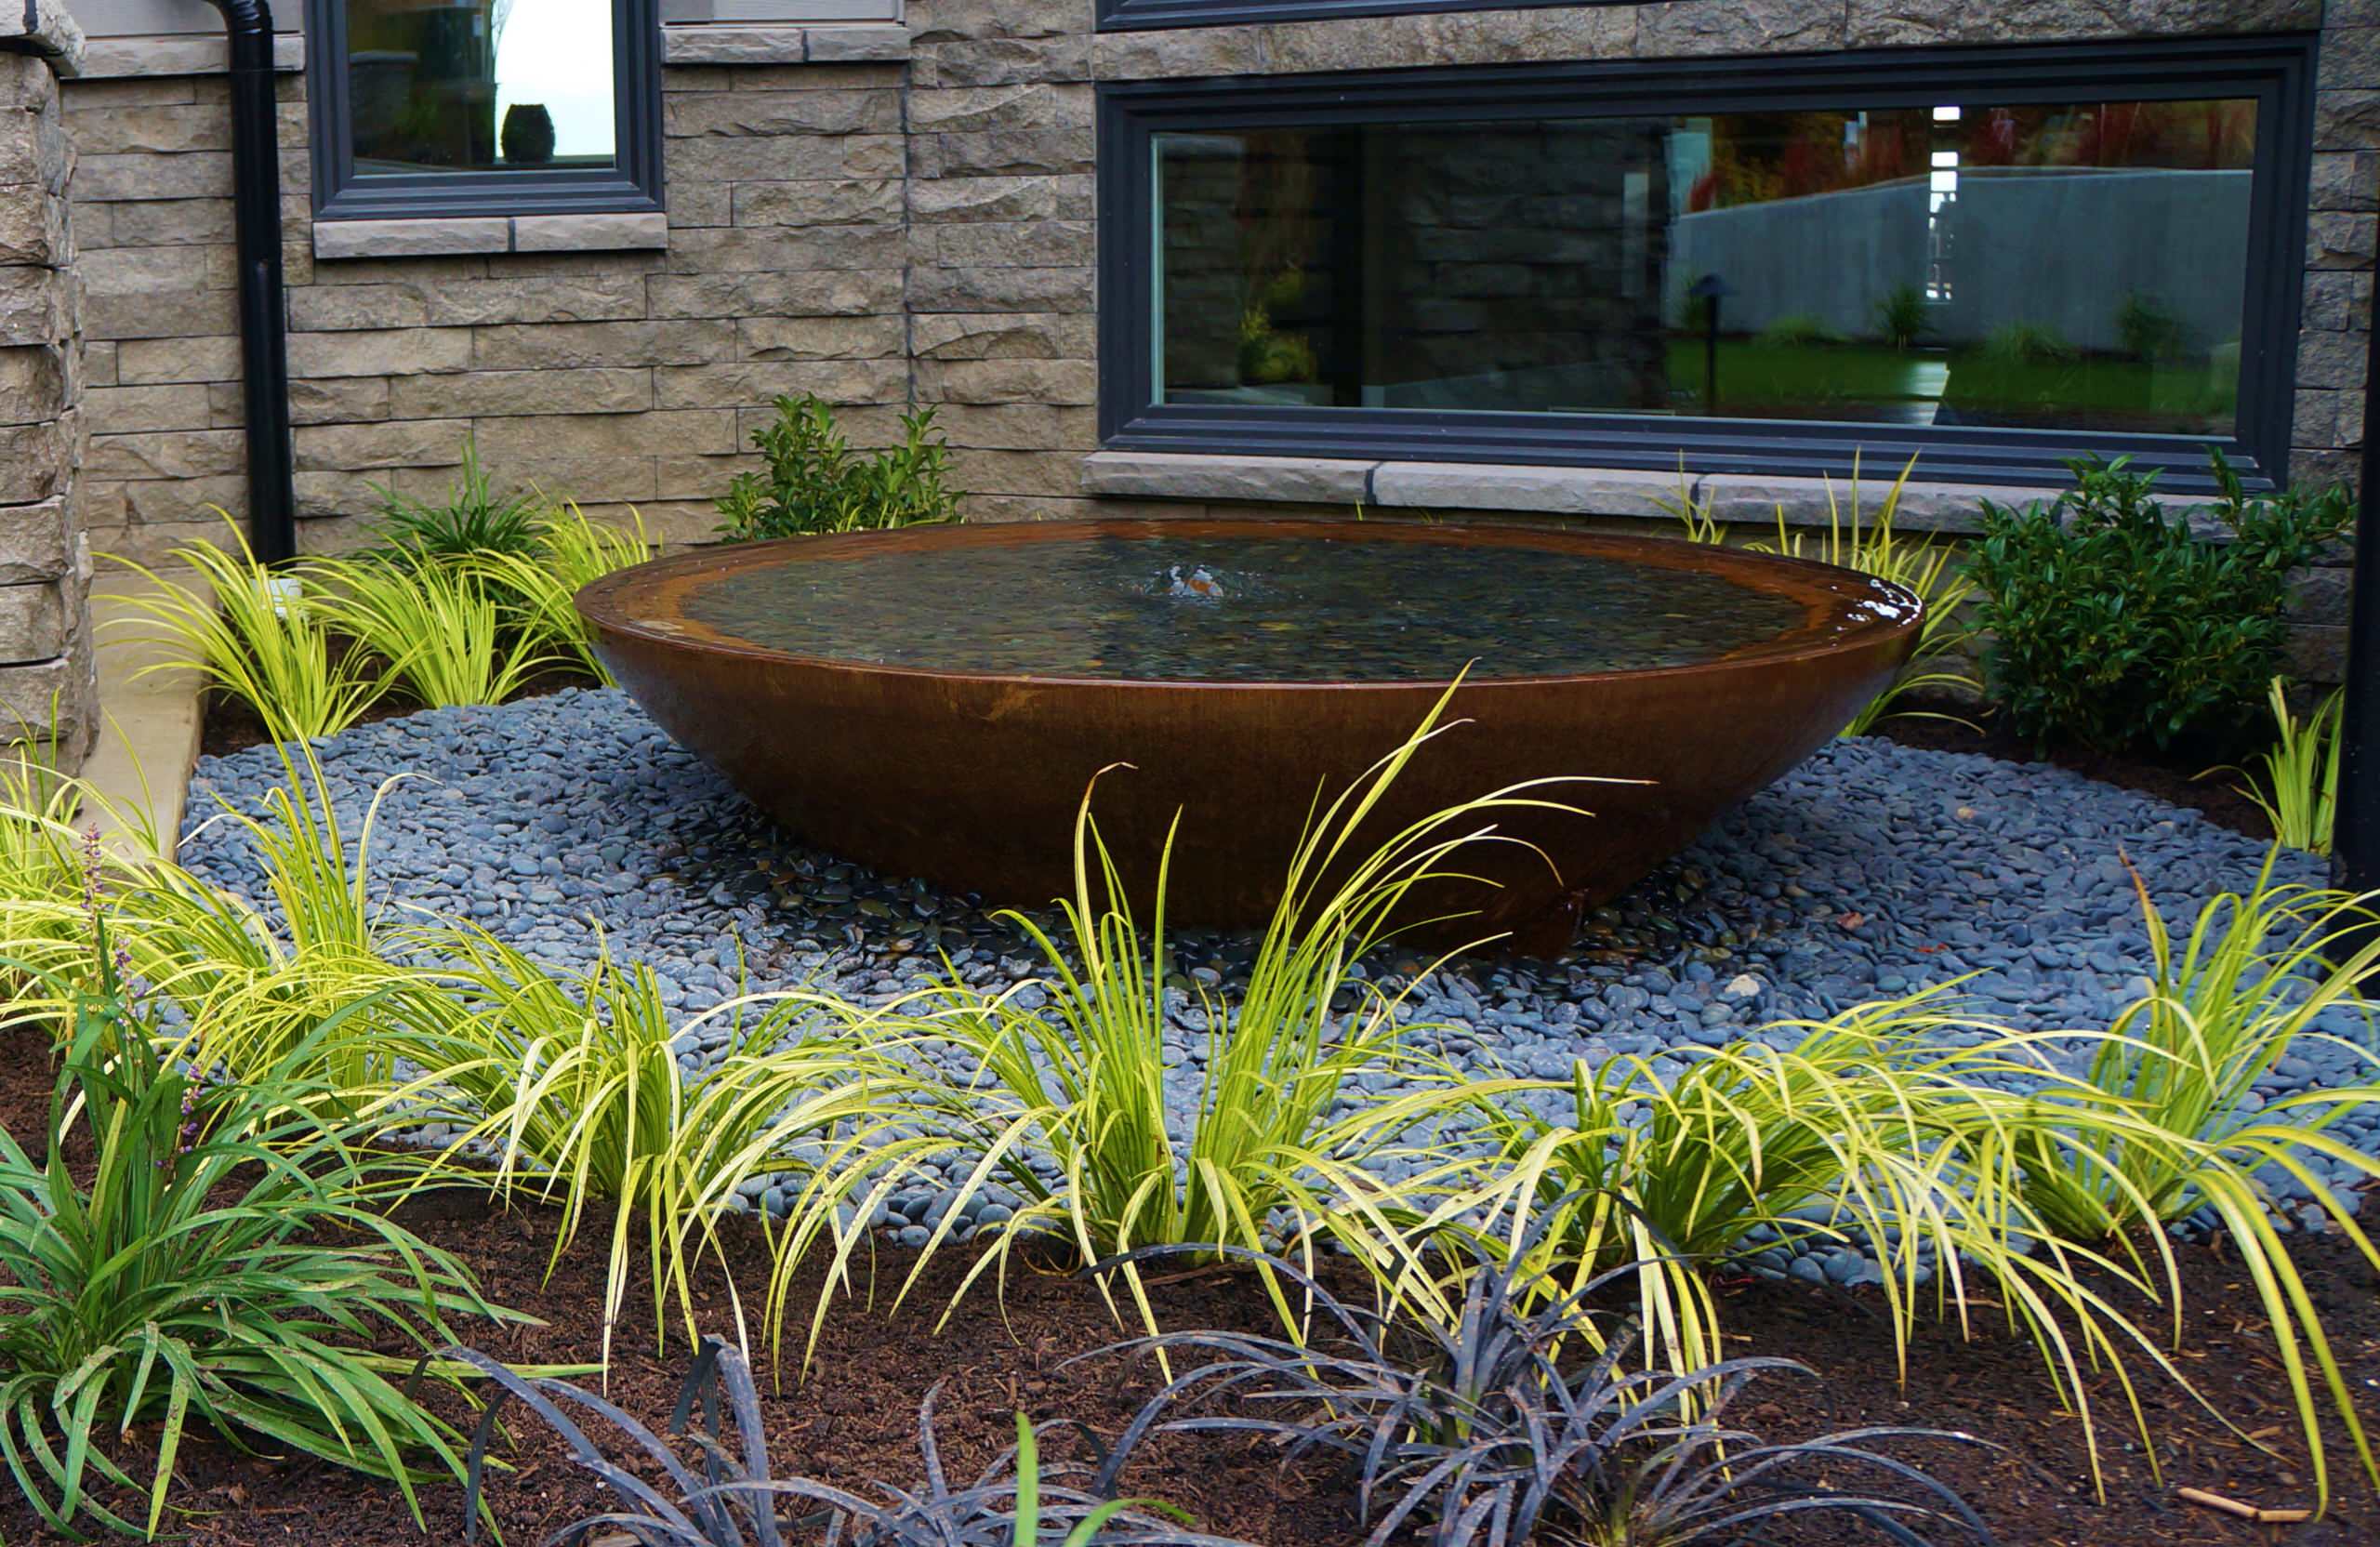 Crusher Cone Fire Pit Houzz, Used Rock Crusher Cone Fire Pit